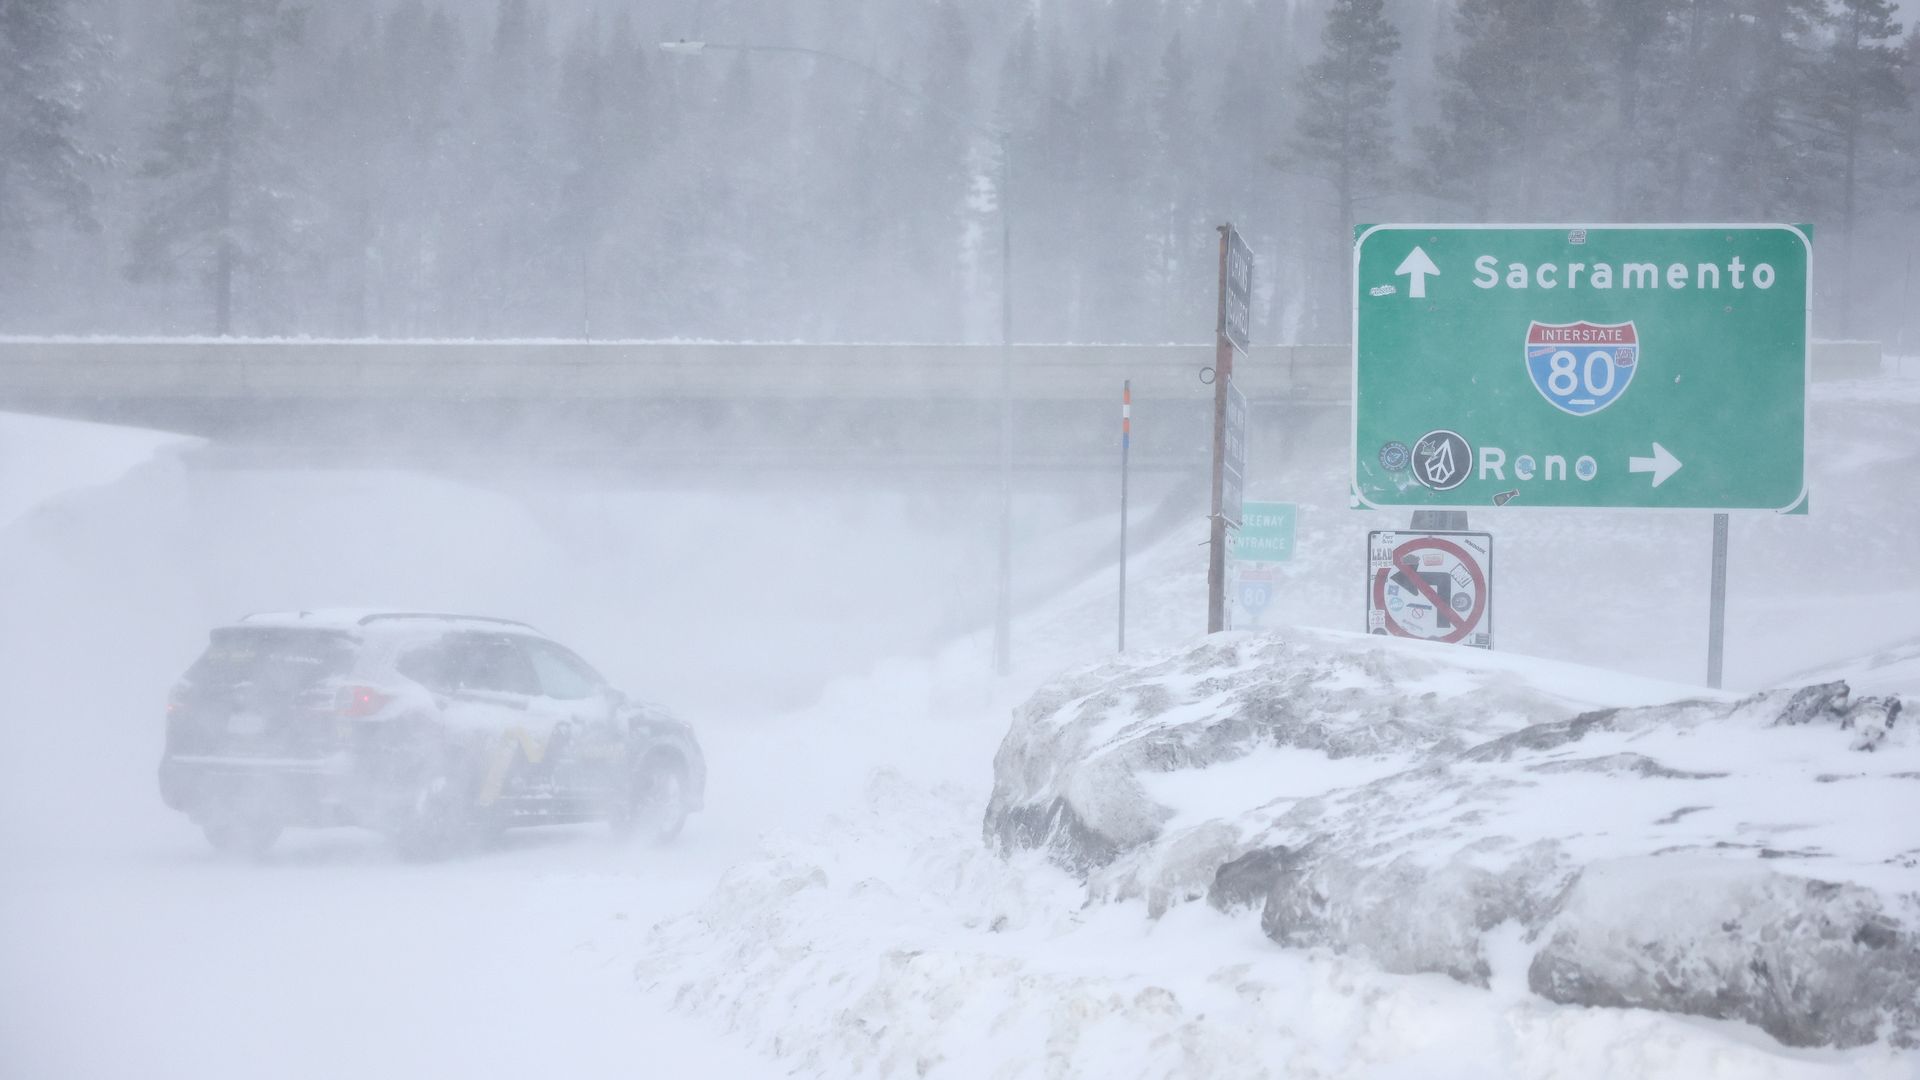 A car drives amid a heavy snowstorm in the higher elevations of California near a road sign saying "Sacramento."